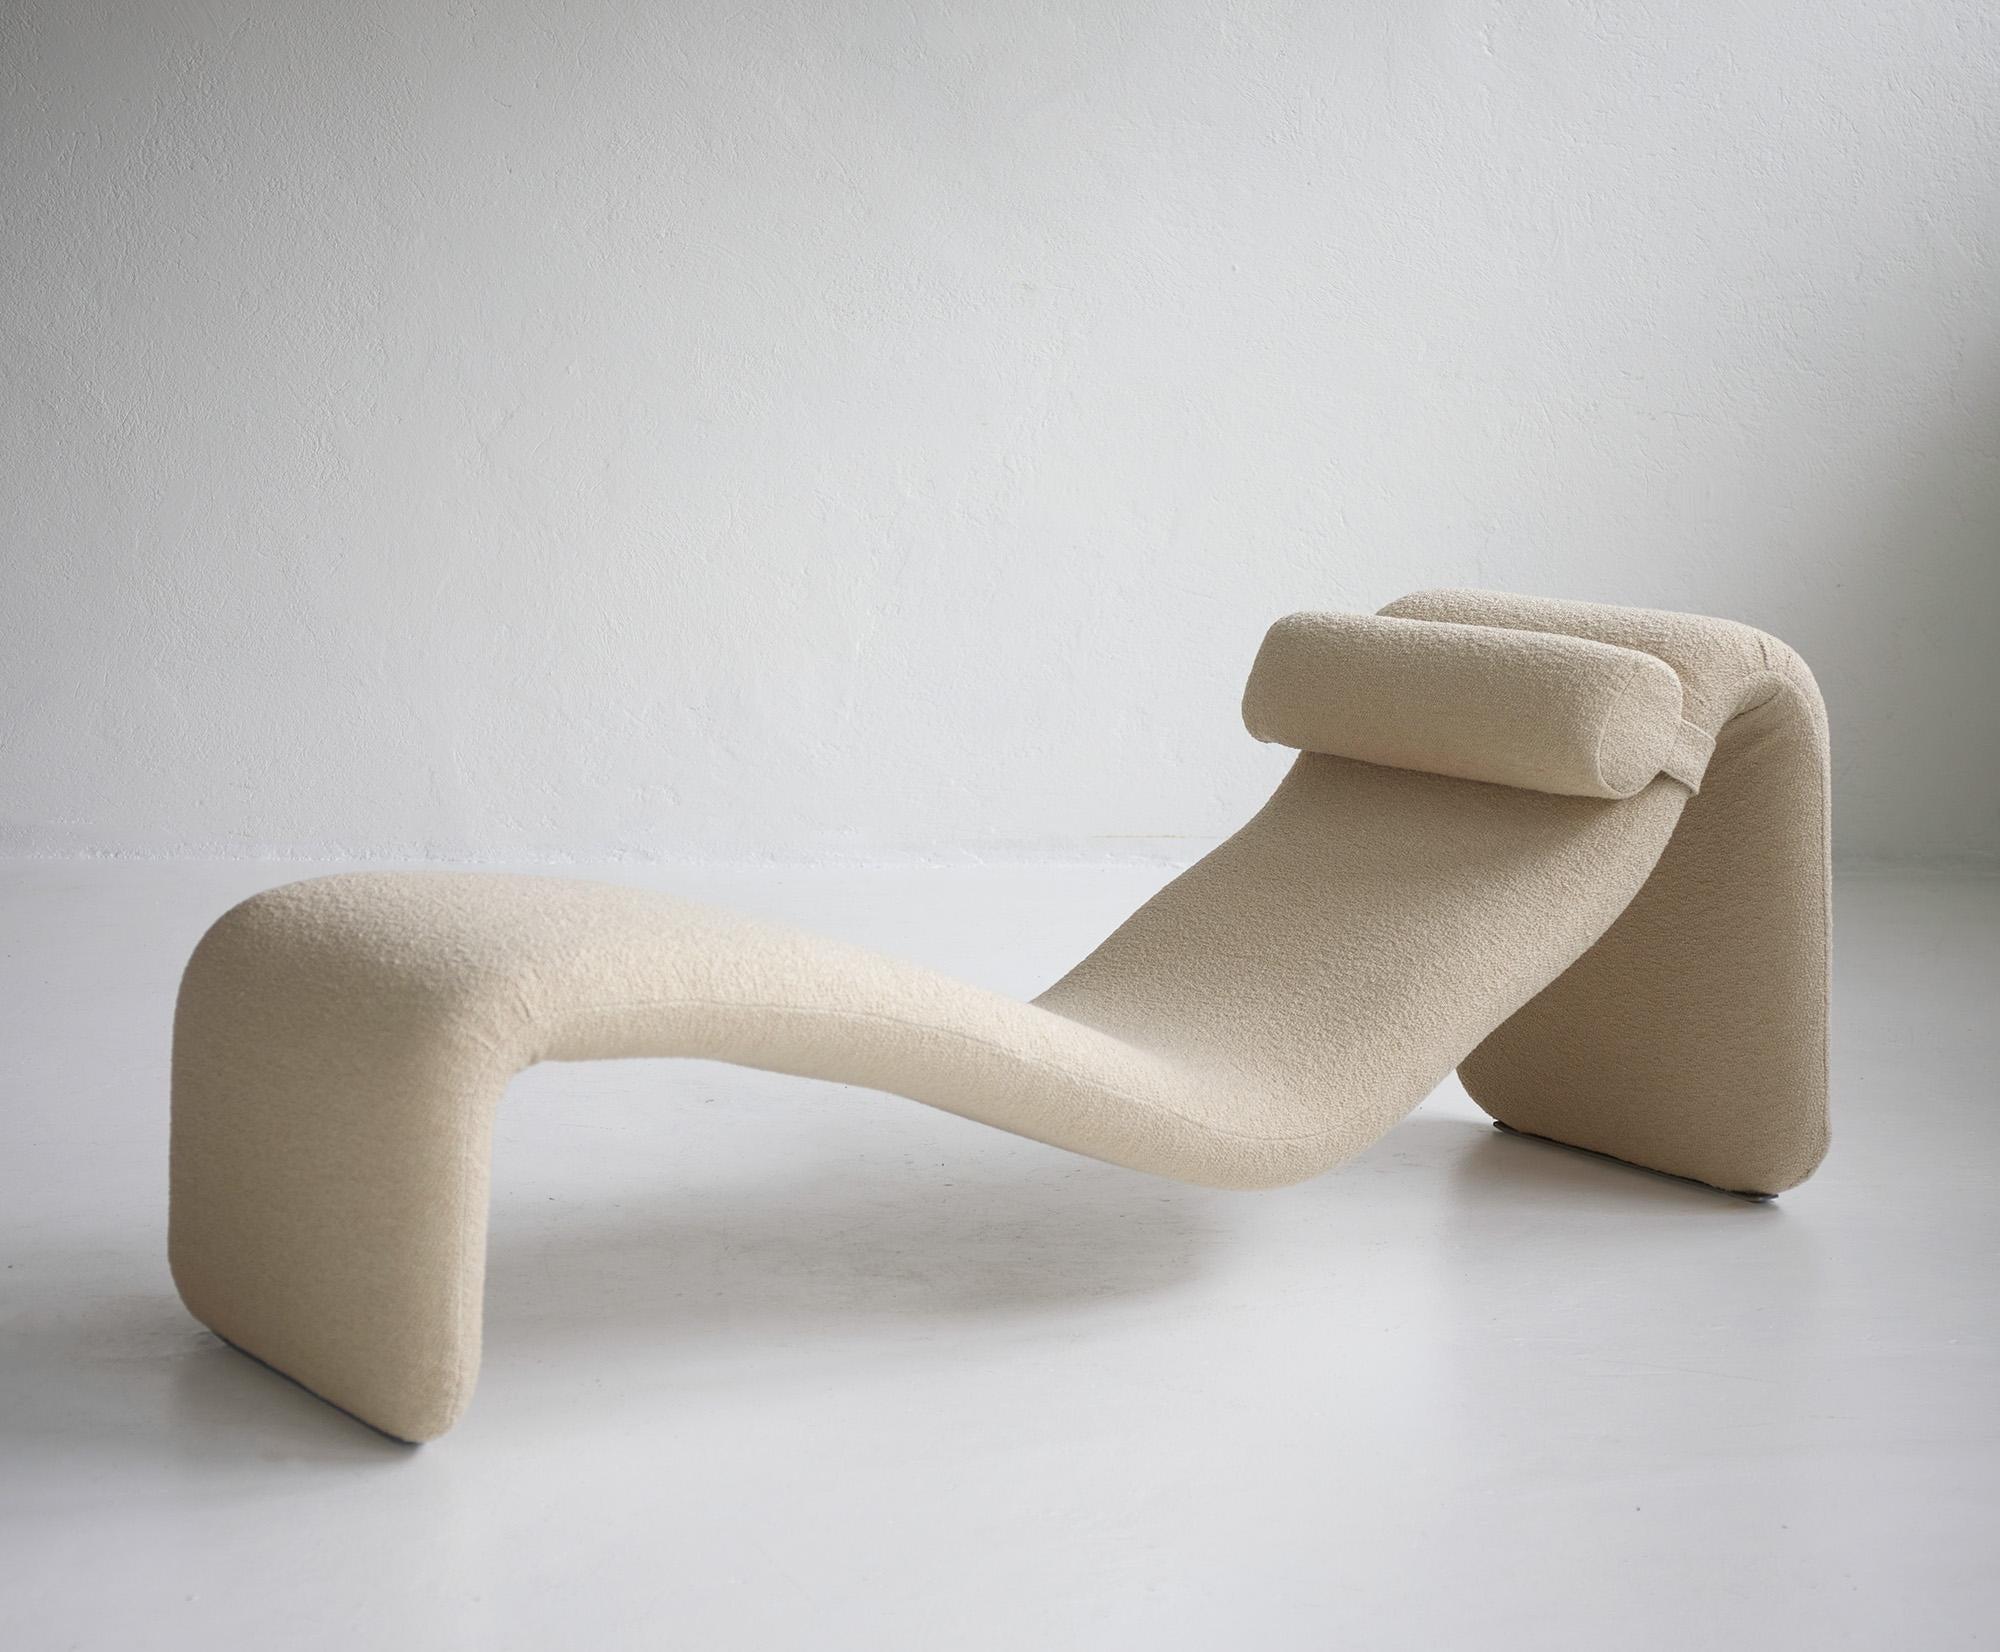 Iconic chaise longue 'Djinn' by Olivier Mourgue for Airborne, France c.1965. 

The Djinn with its futuristic and ergonomic shape is an invitation to rest for all our senses. The sleek and curvy lines as well as the cozy fabric make this a  French